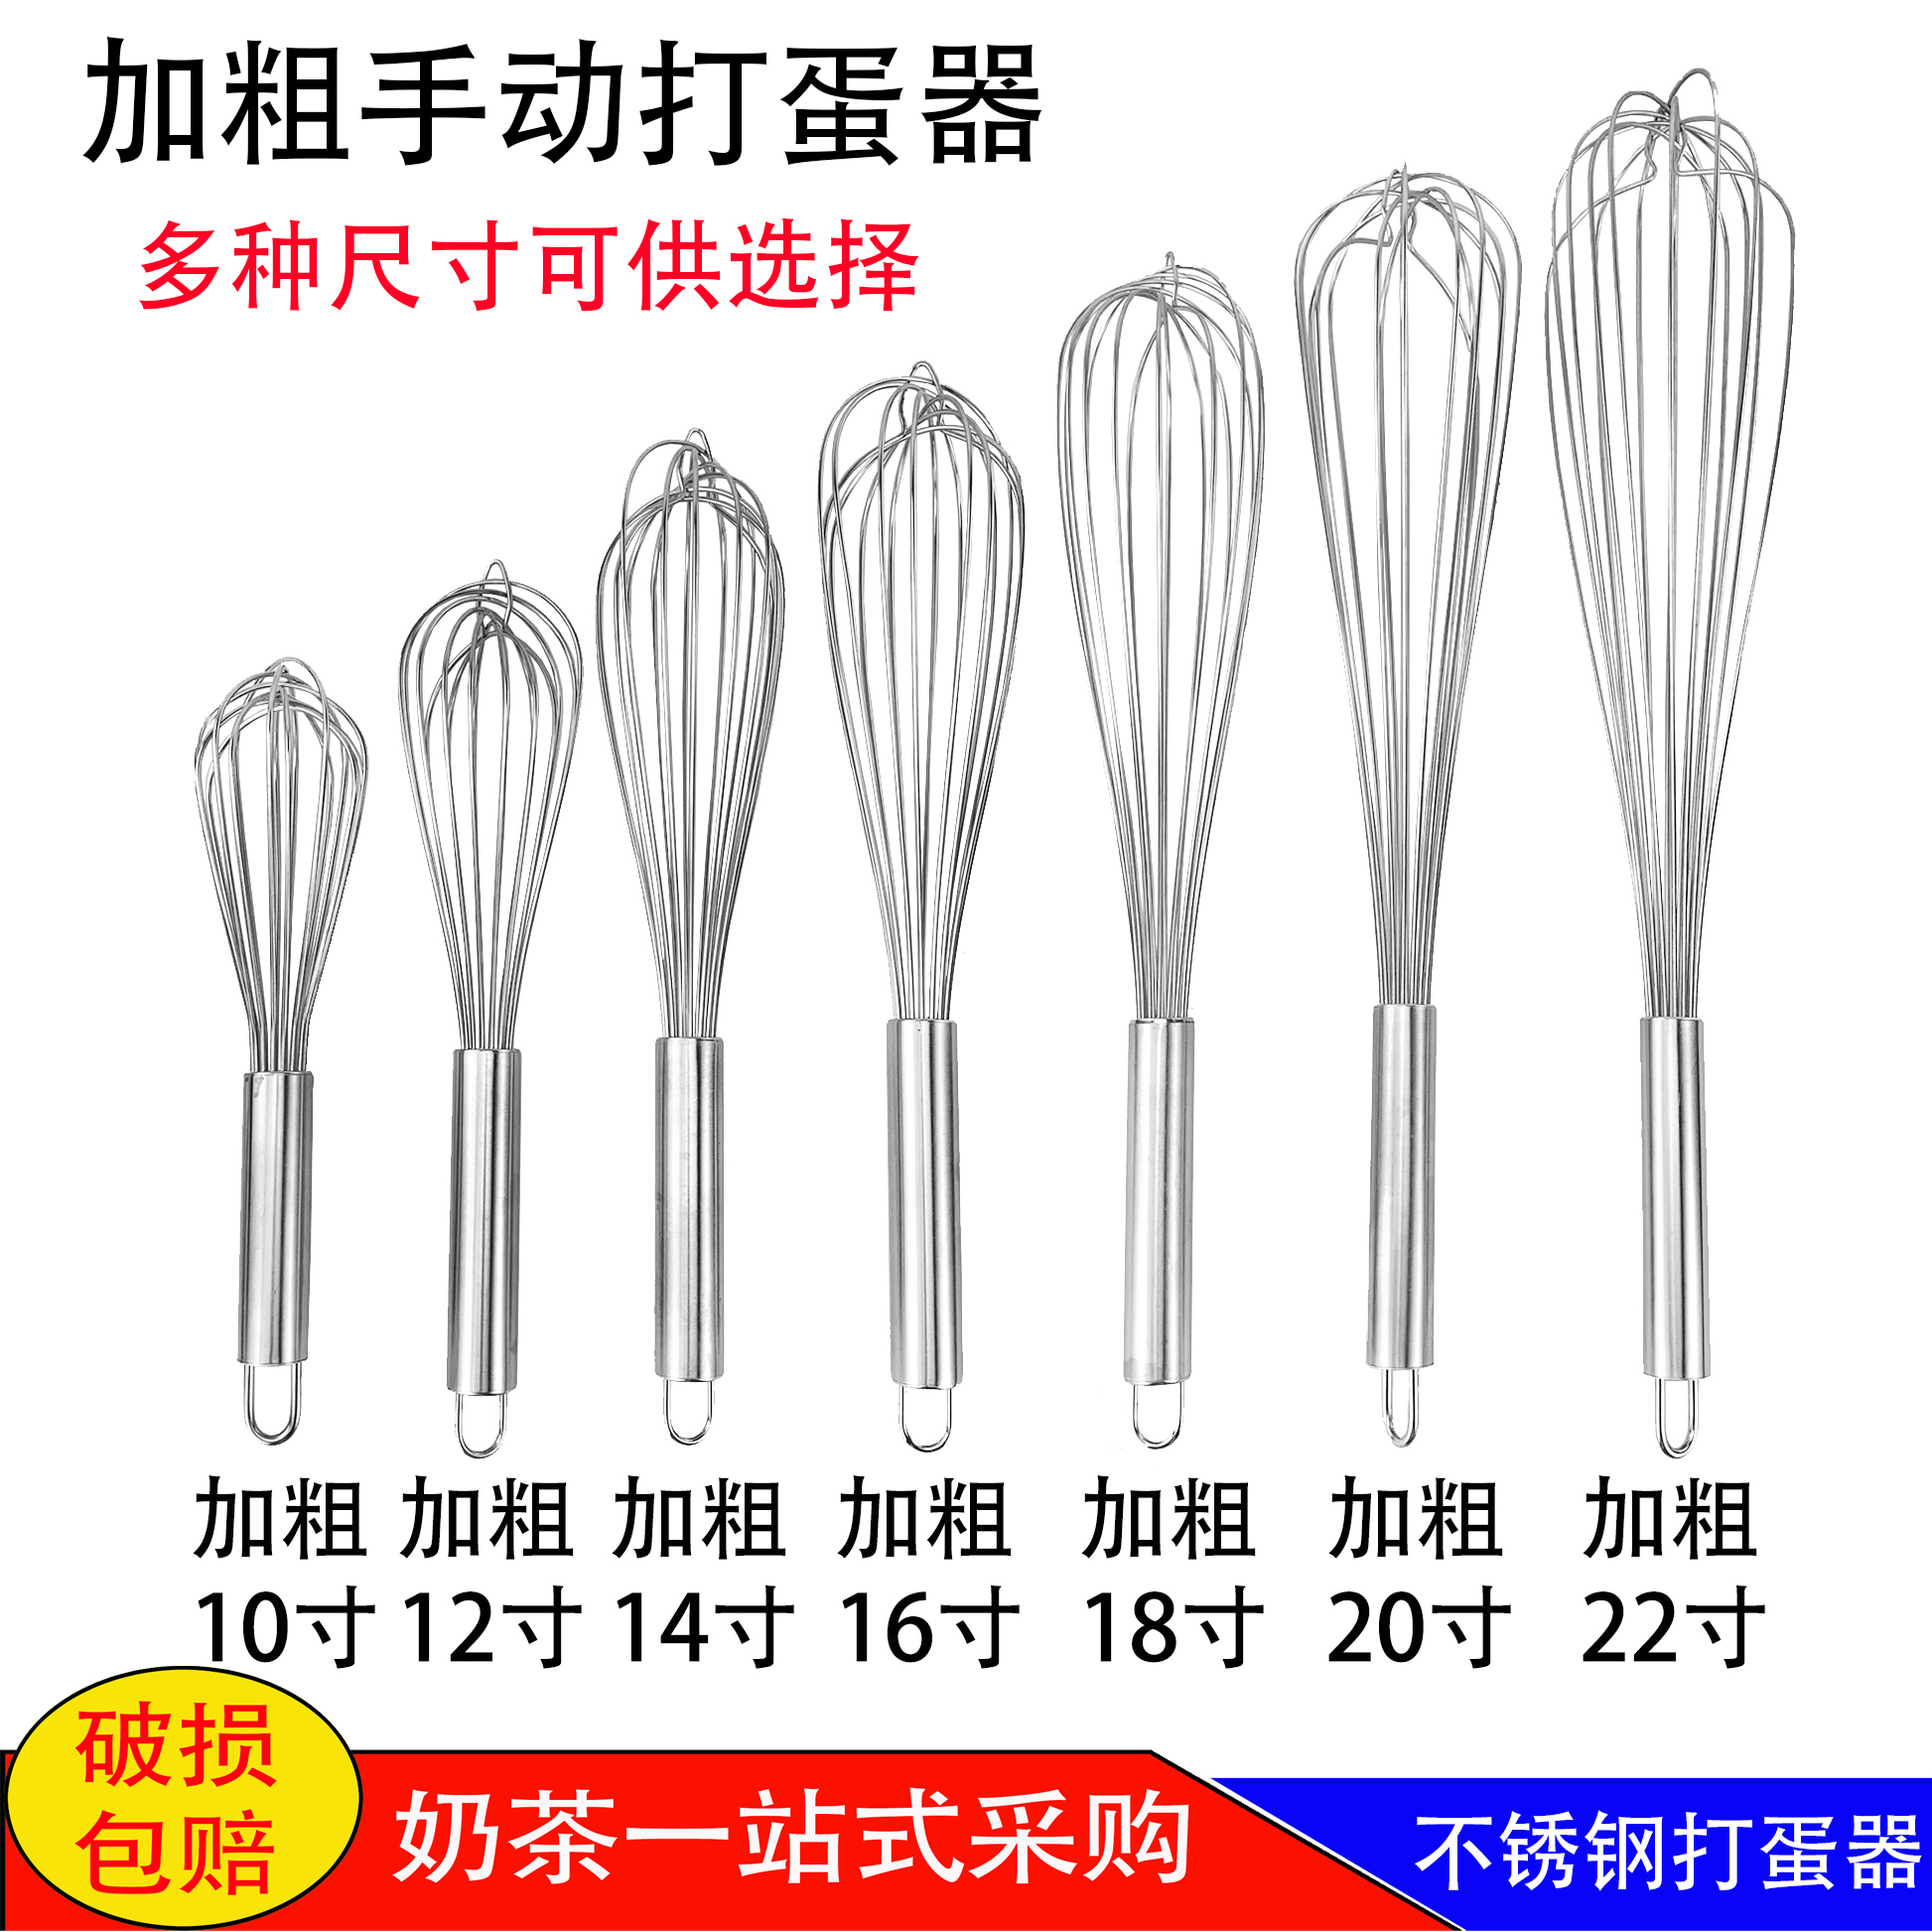 Stainless steel whisk manual thickened hand stirring stick and noodle egg whisk extension baking tool